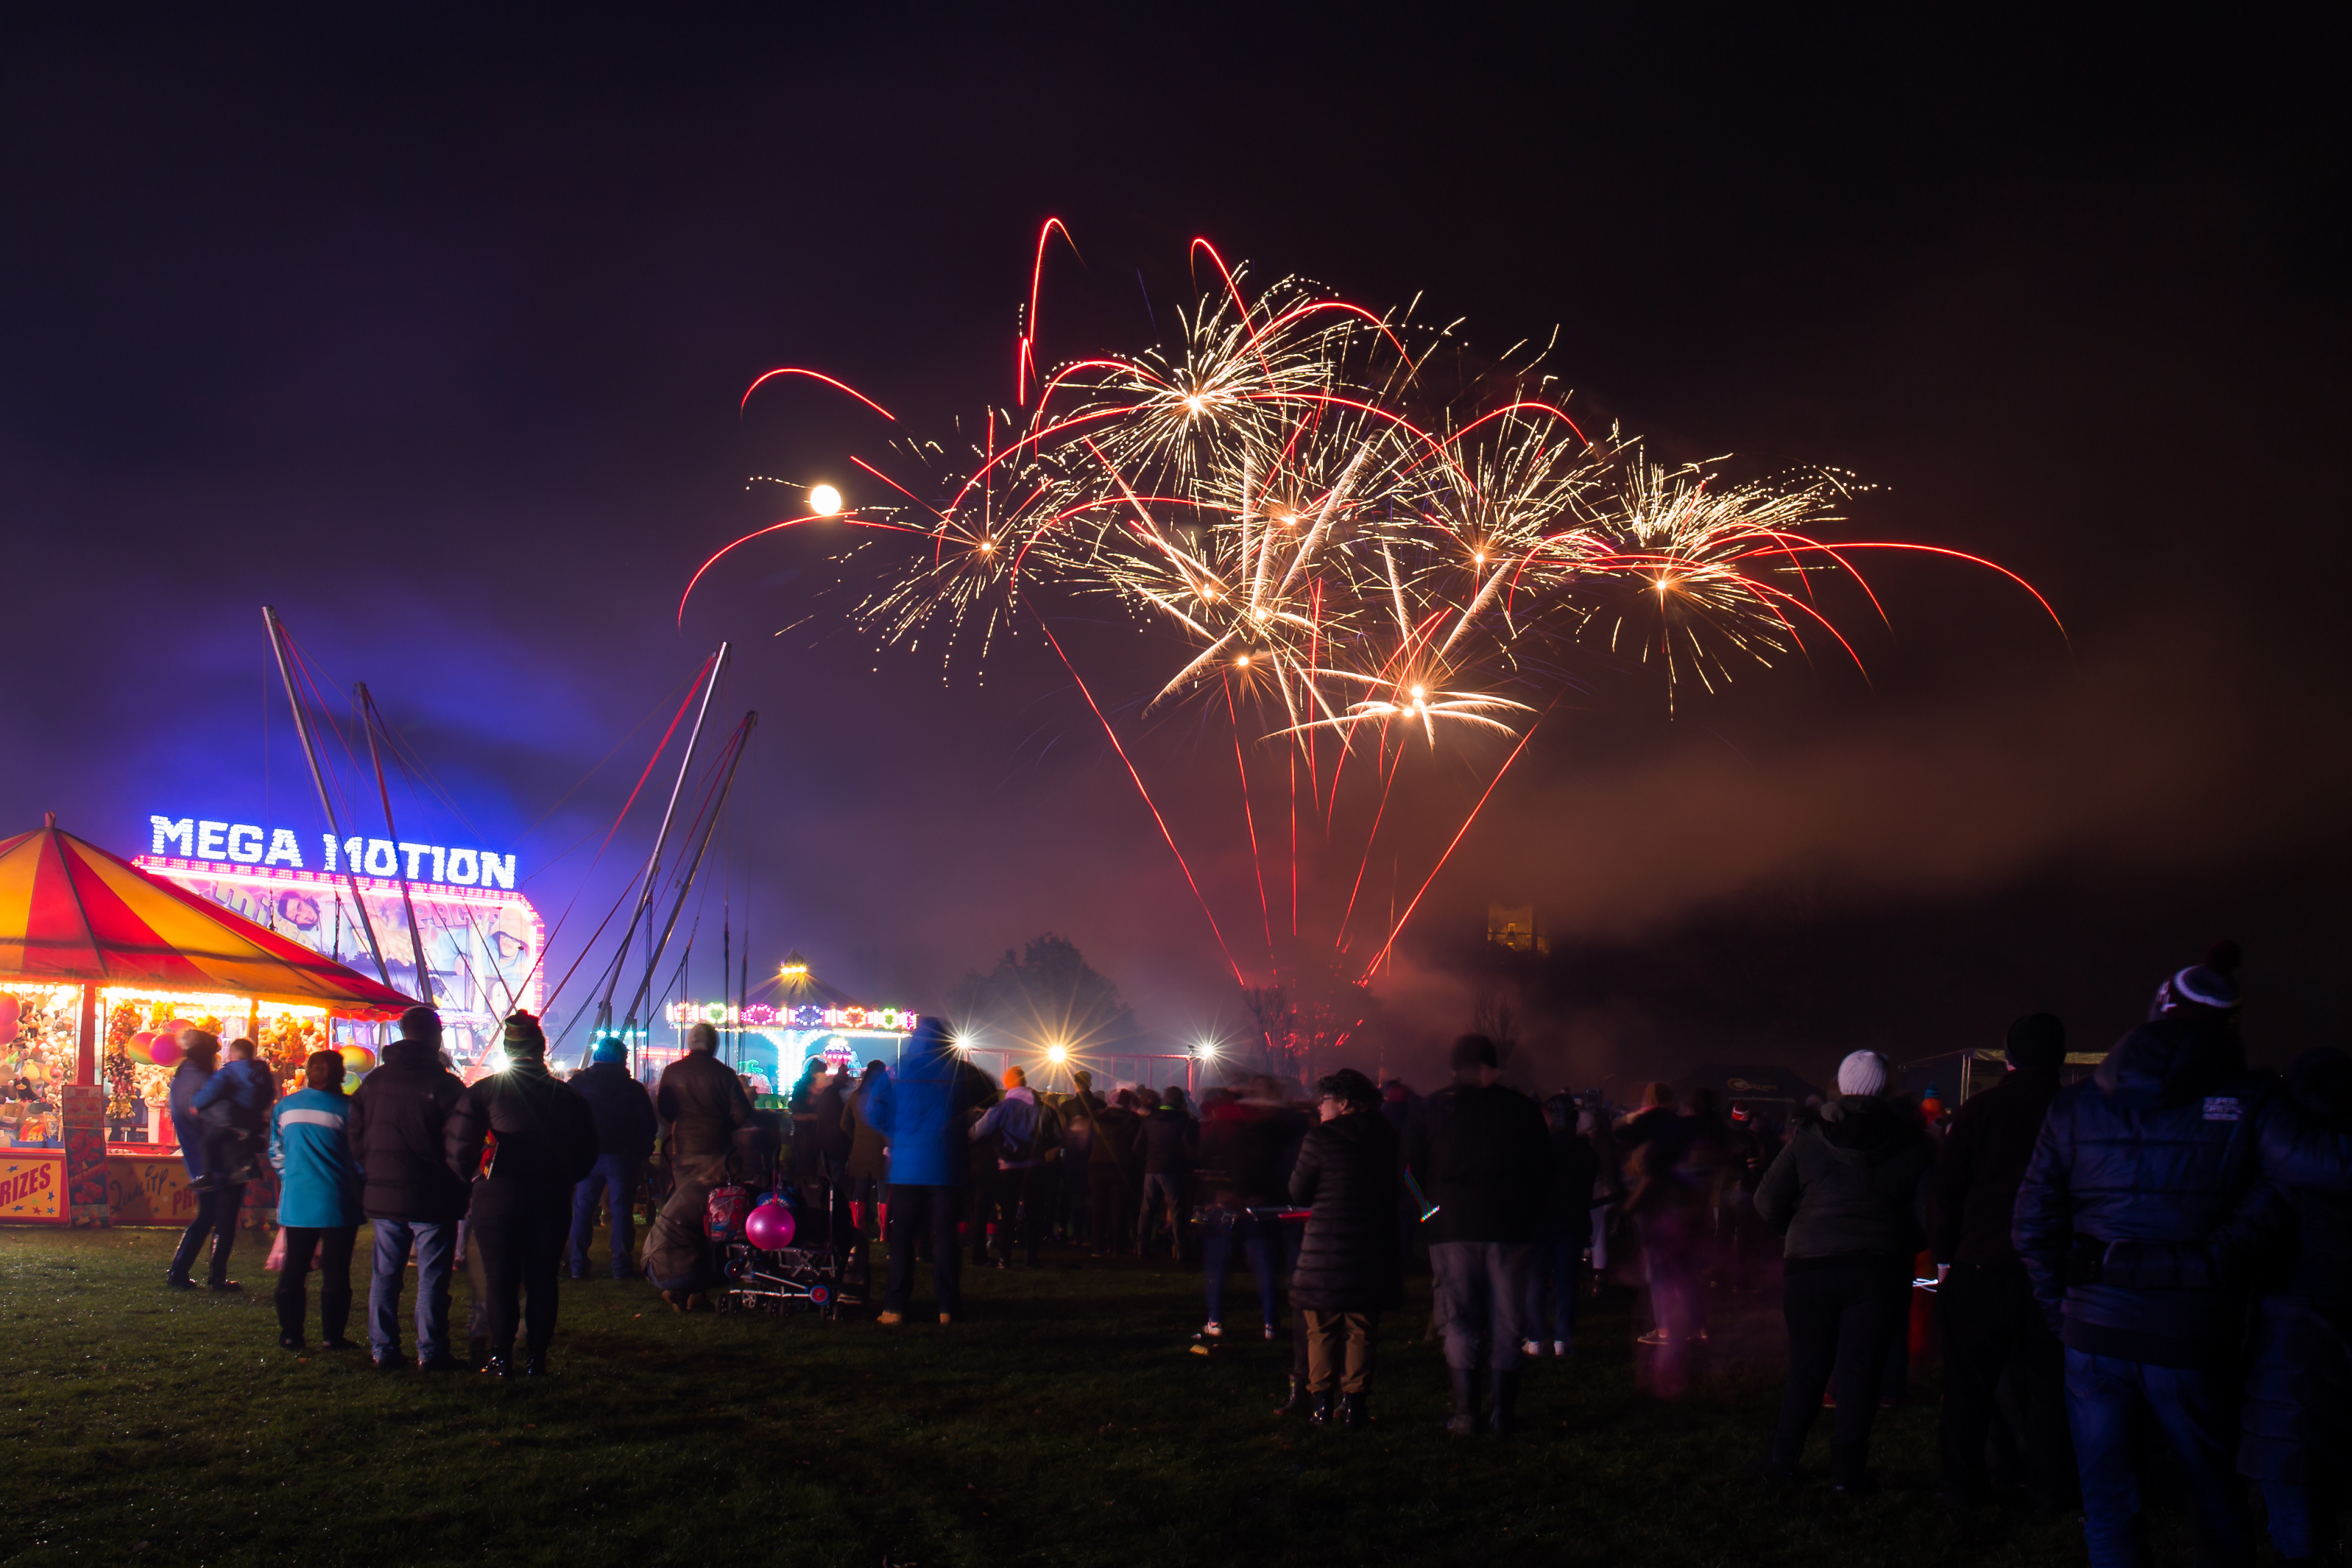 Tickets Selling Fast for Circus Themed Fireworks Display